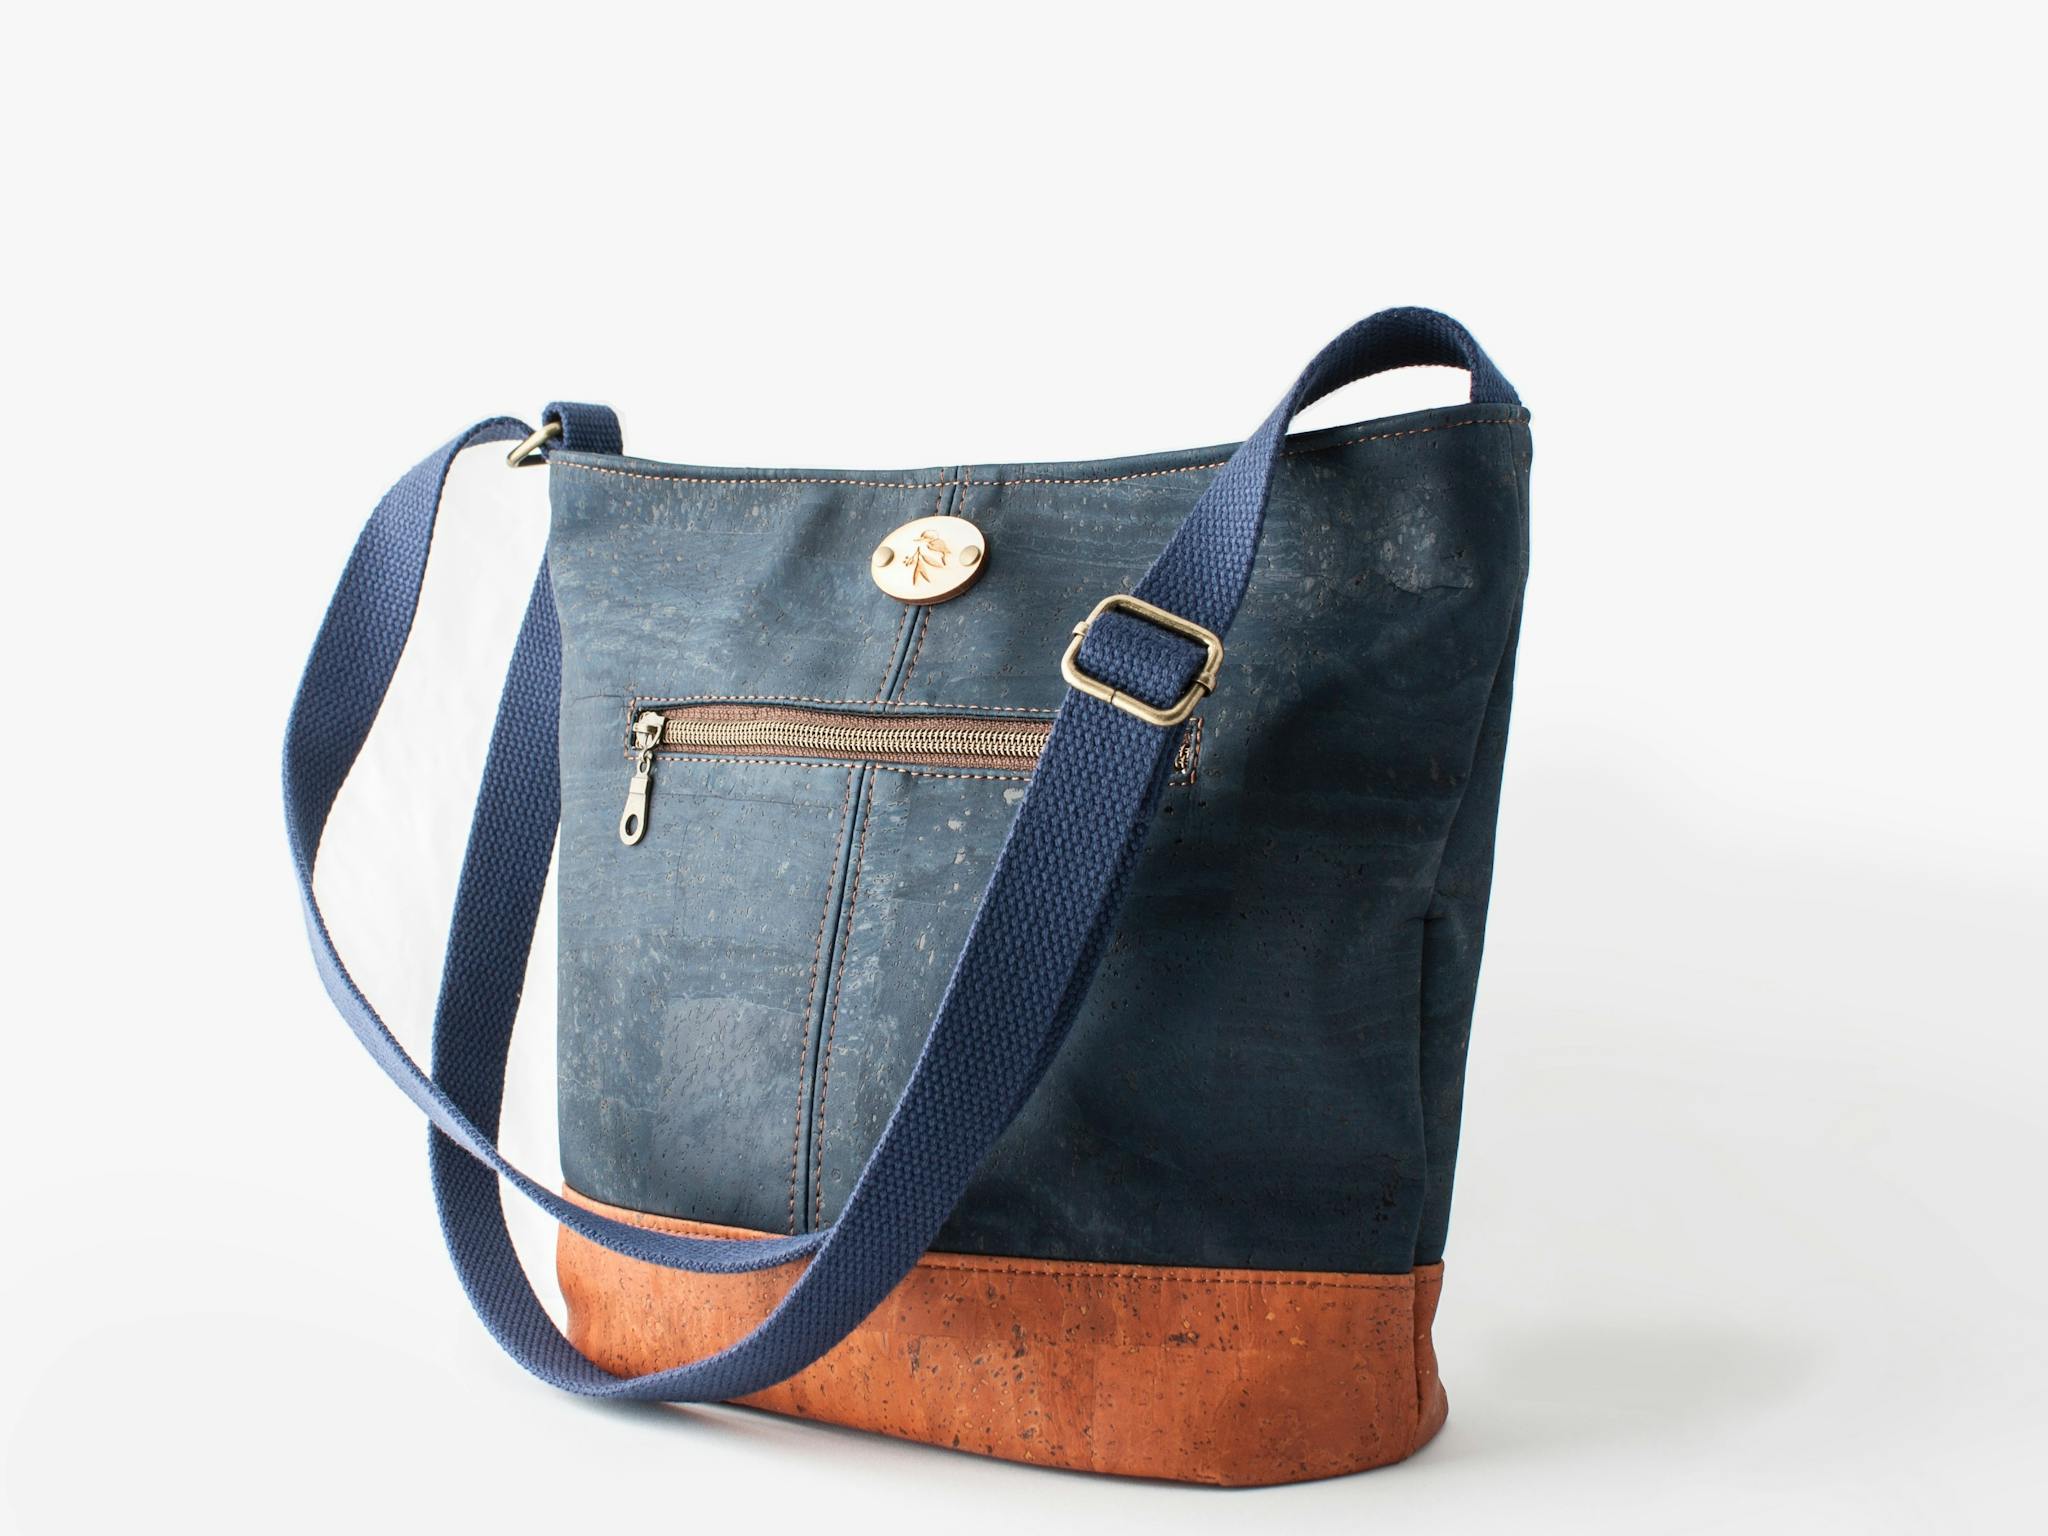 Blue Cork shoulder bag. Handcrafted accessory by Rosemary Lloyd, Jamieson Rose.